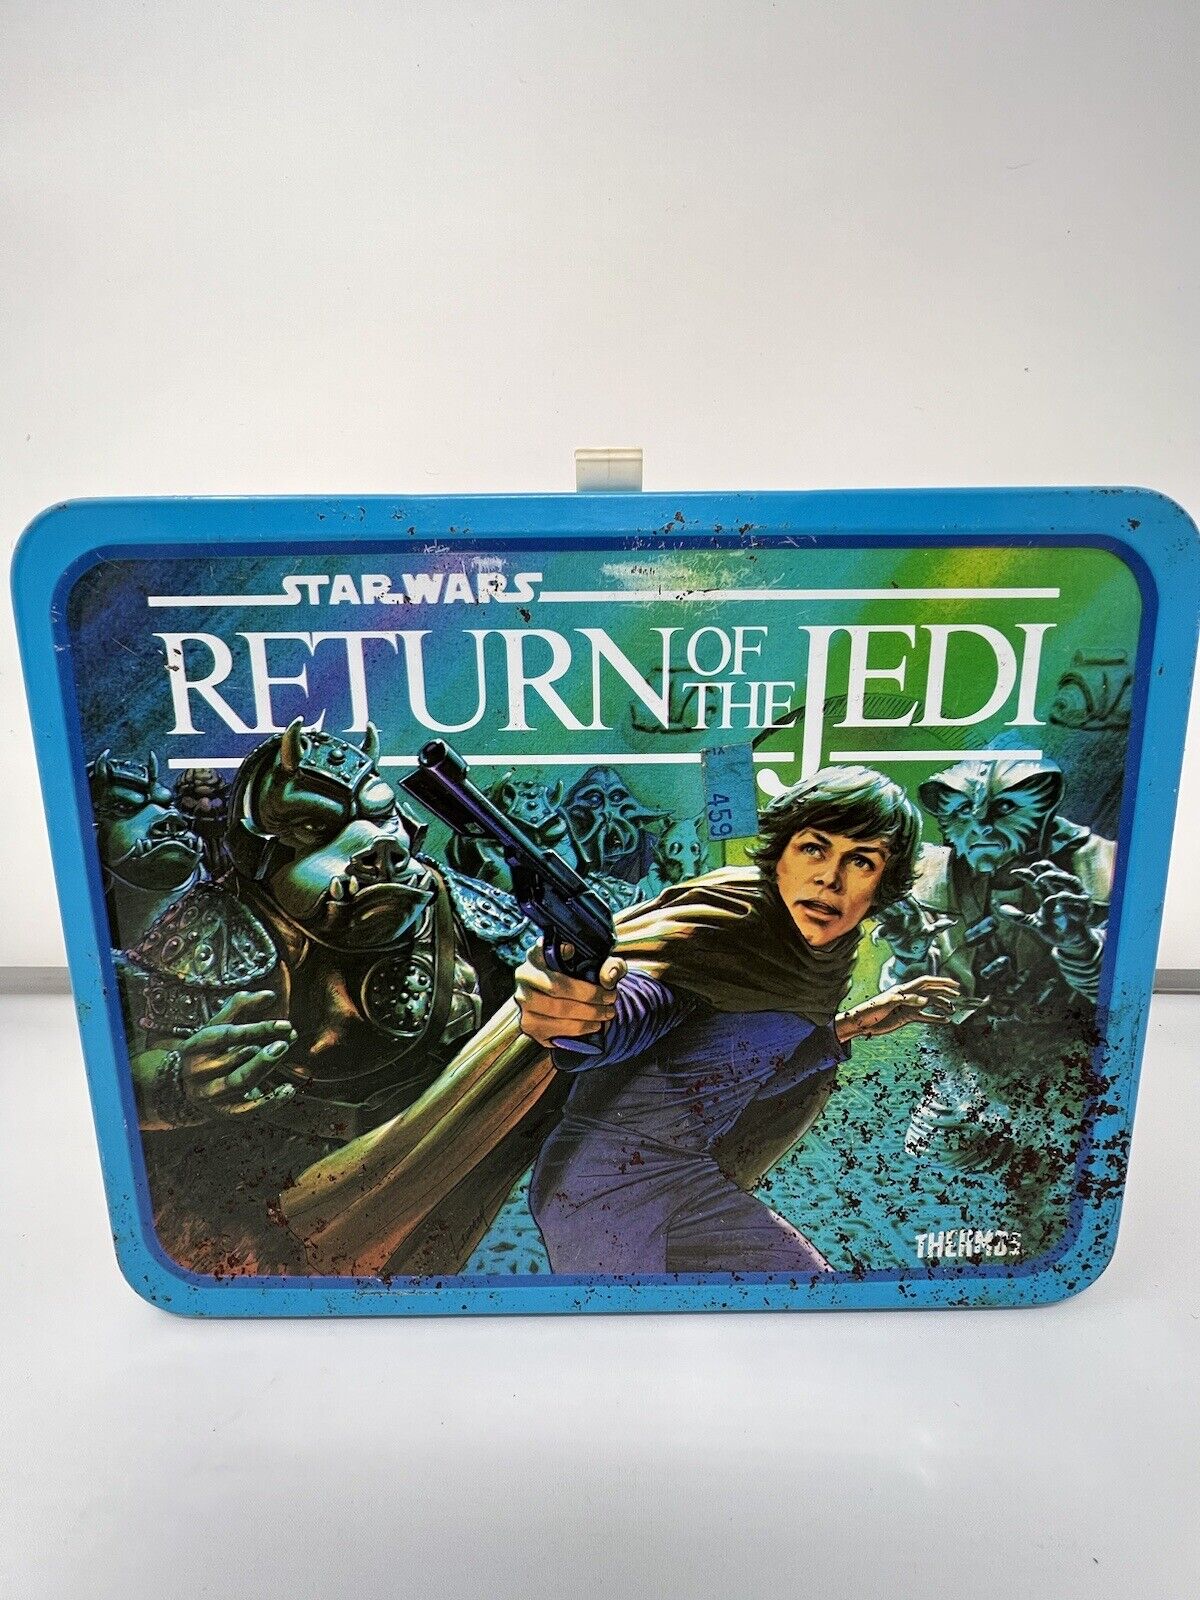 Vintage 1983 Star Wars Return of the Jedi Metal Lunch Box w/ Thermos